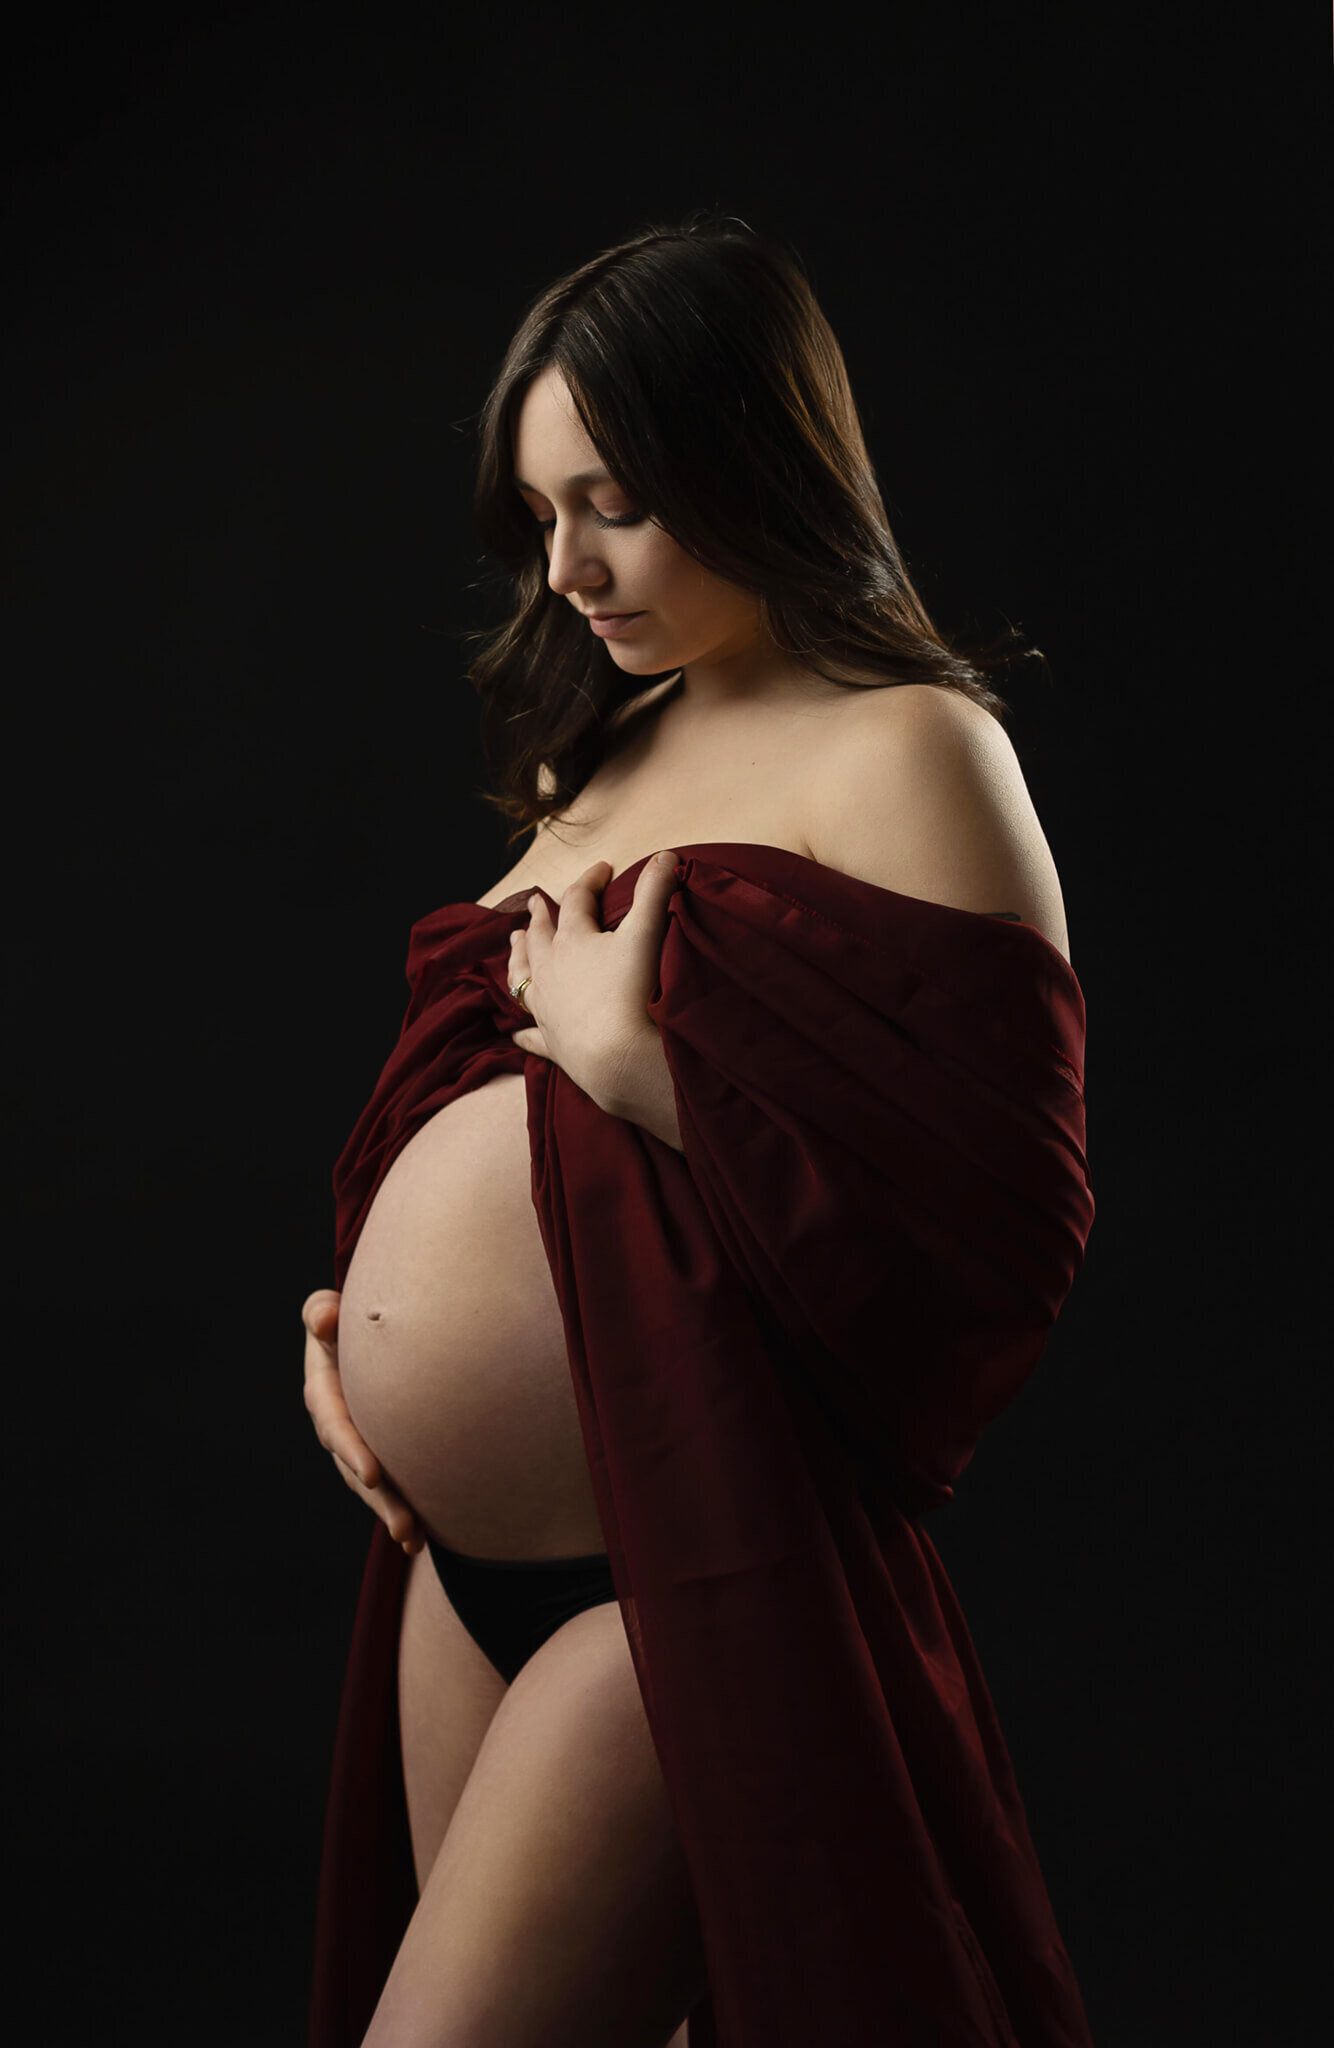 Maternity photoshoot in Austin of a woman wearing black lingerie and a red dress